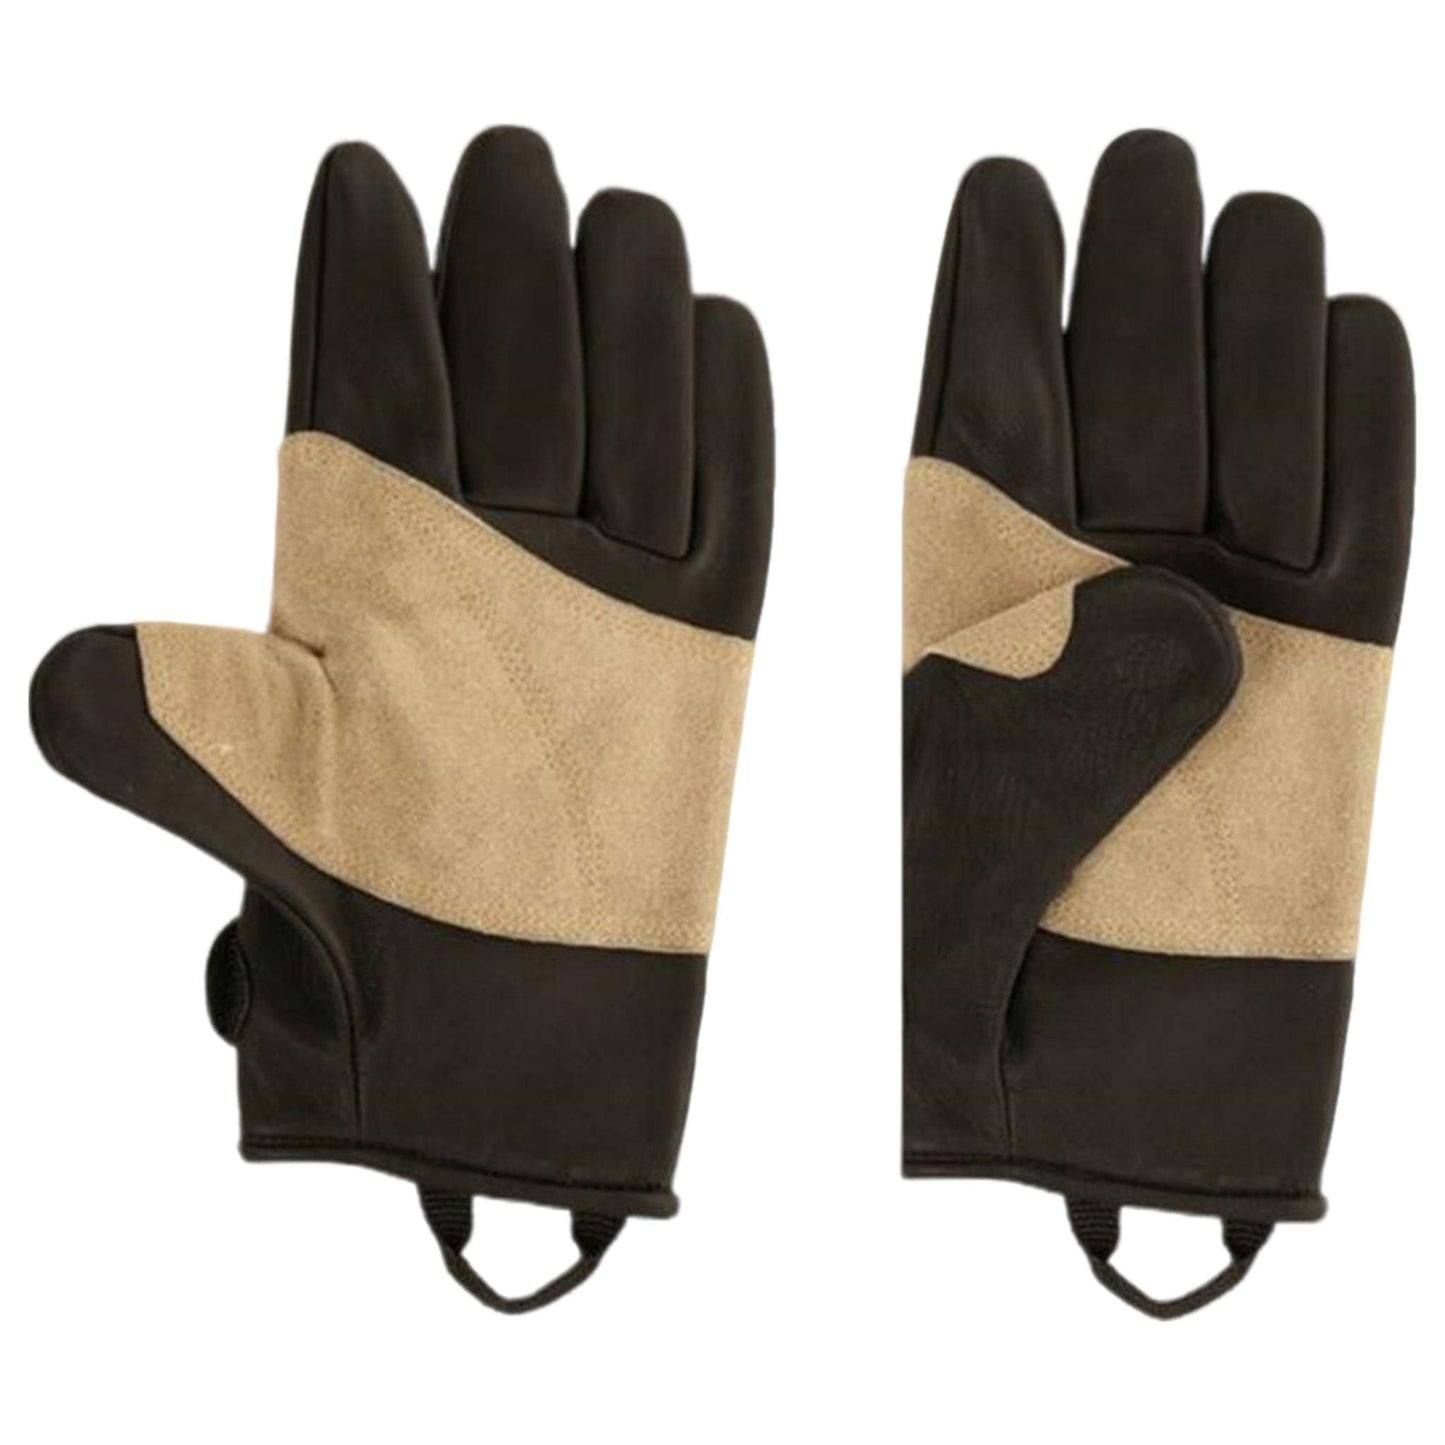 Grippy Leather Glove - Full-Finger Durability for Climbing & Rescue